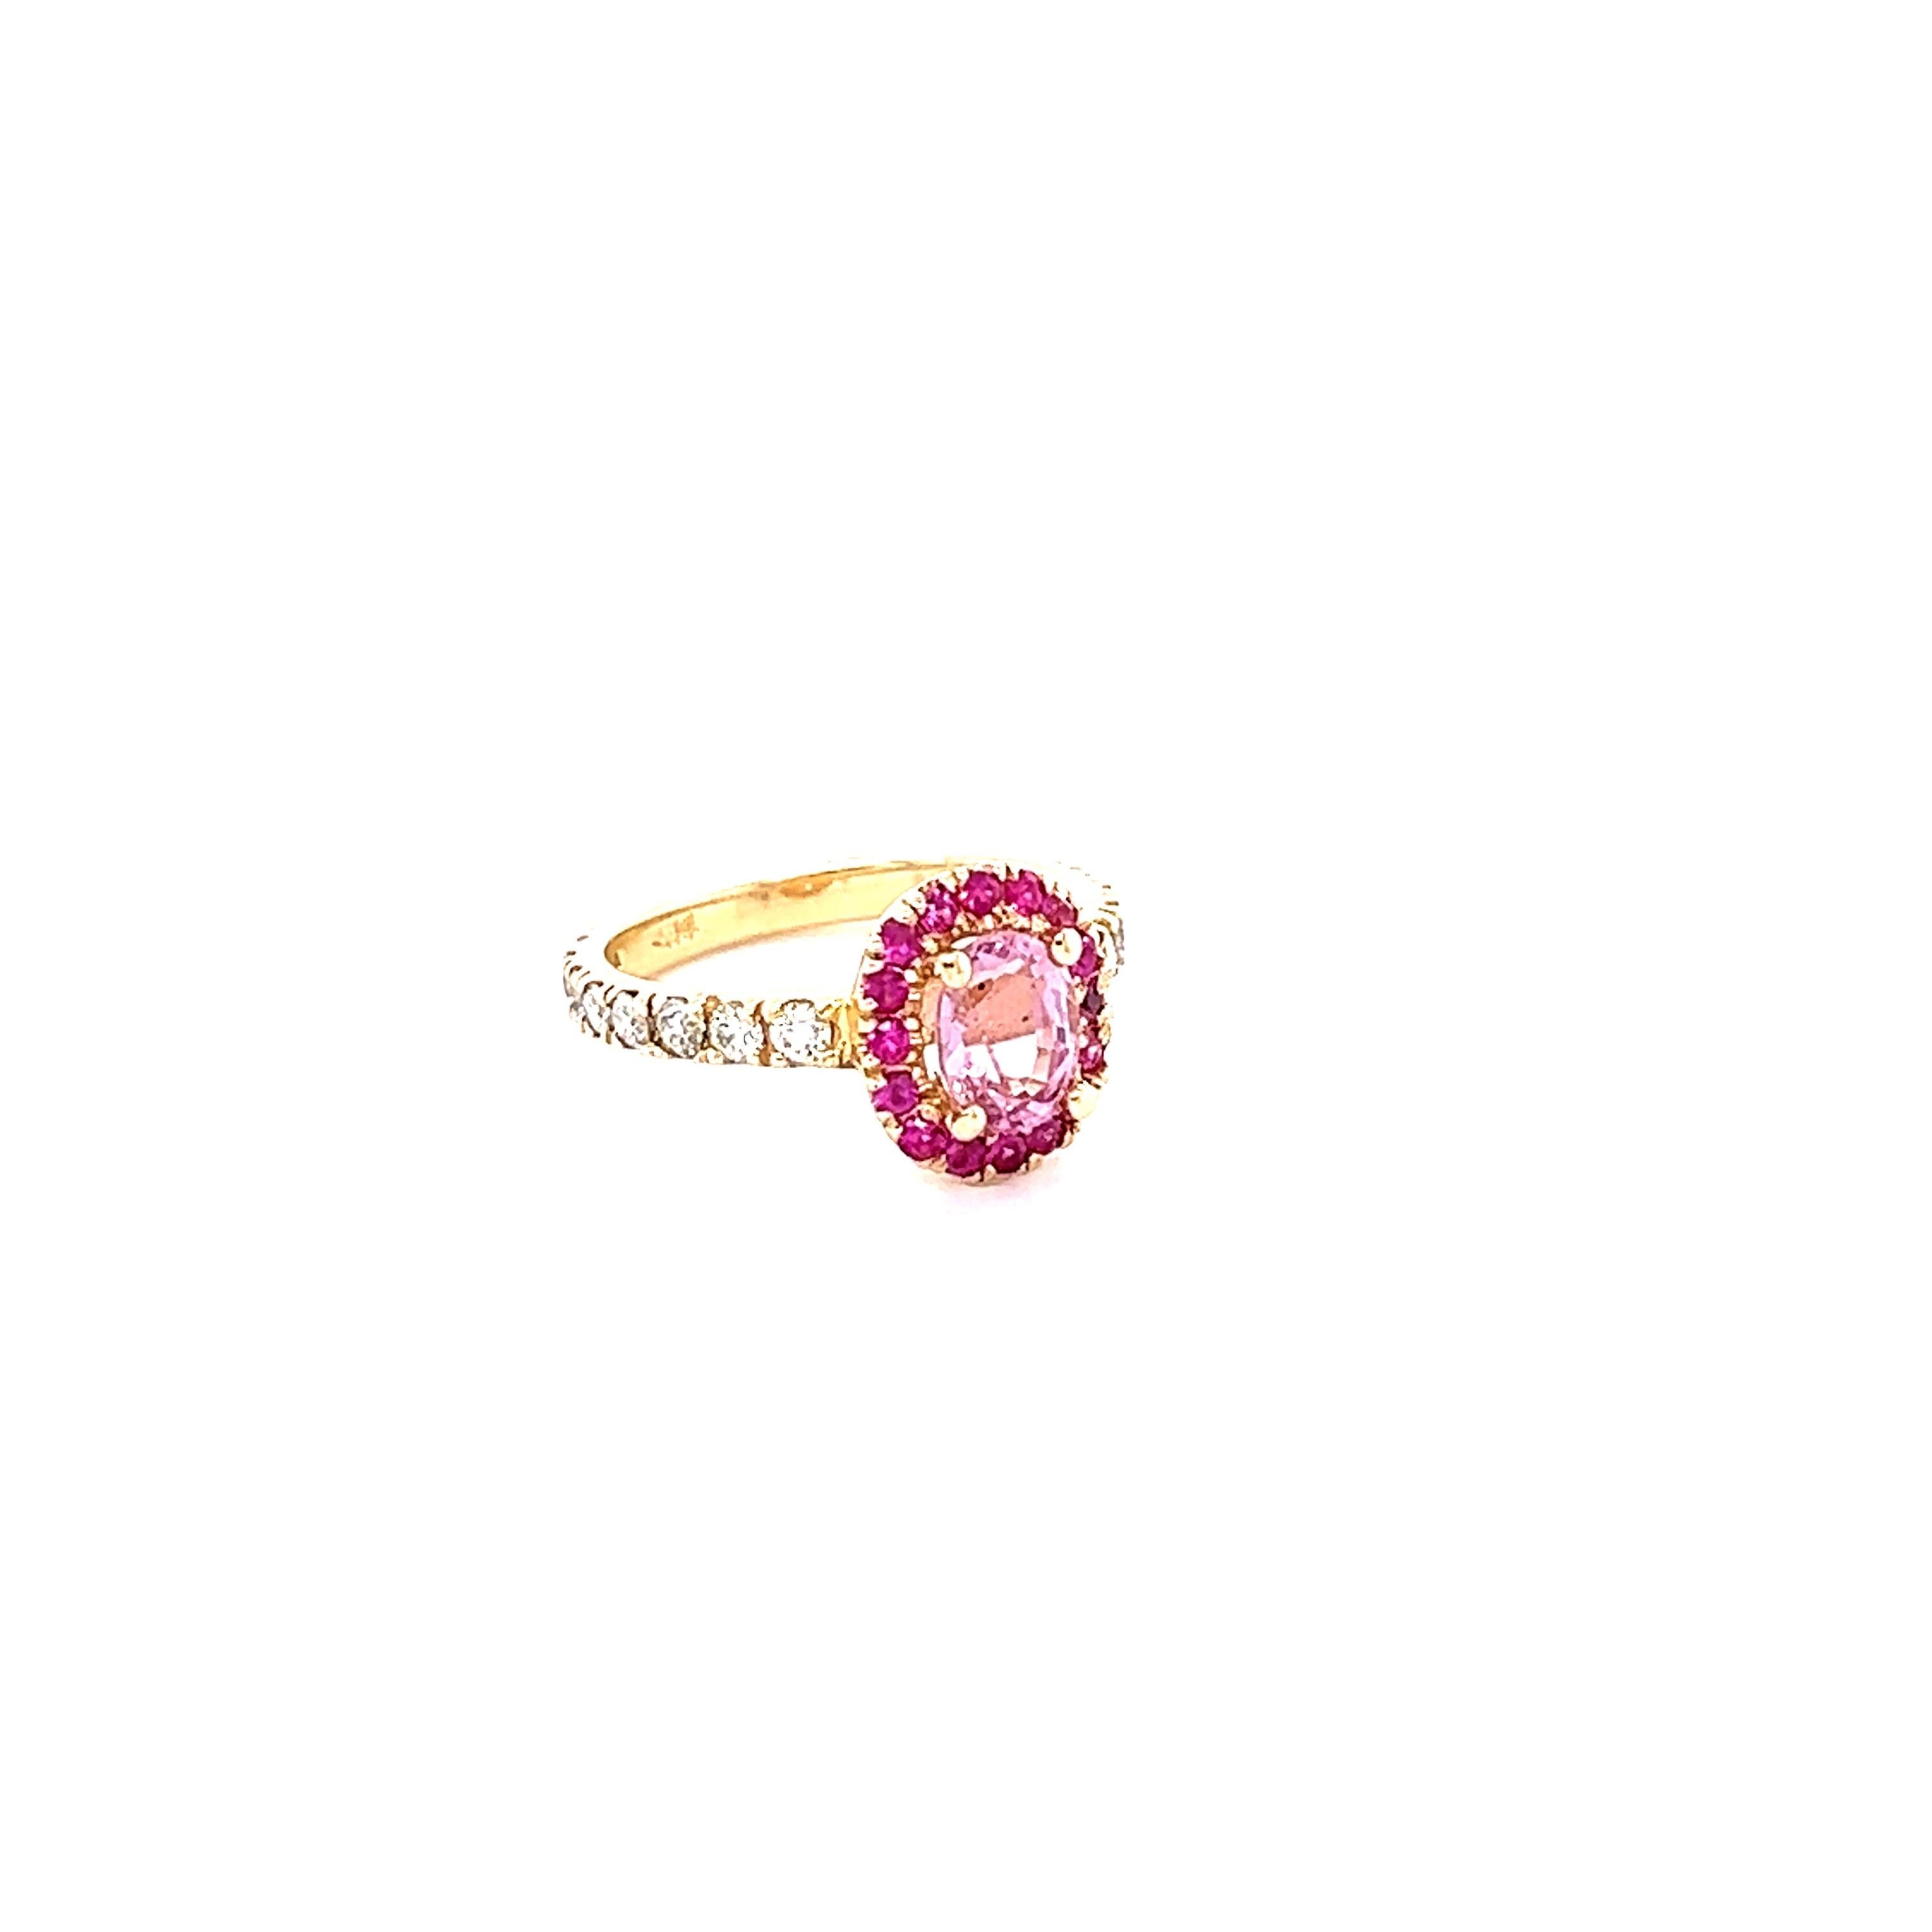 This beautiful ring has a Oval Cut Pink Sapphire that weighs 1.02 Carat. The Pink Sapphire has a beautiful light pink color that is saturated. The measurements of the sapphire are approximately 6.5 mm x 5 mm. 
The ring is further embellished with